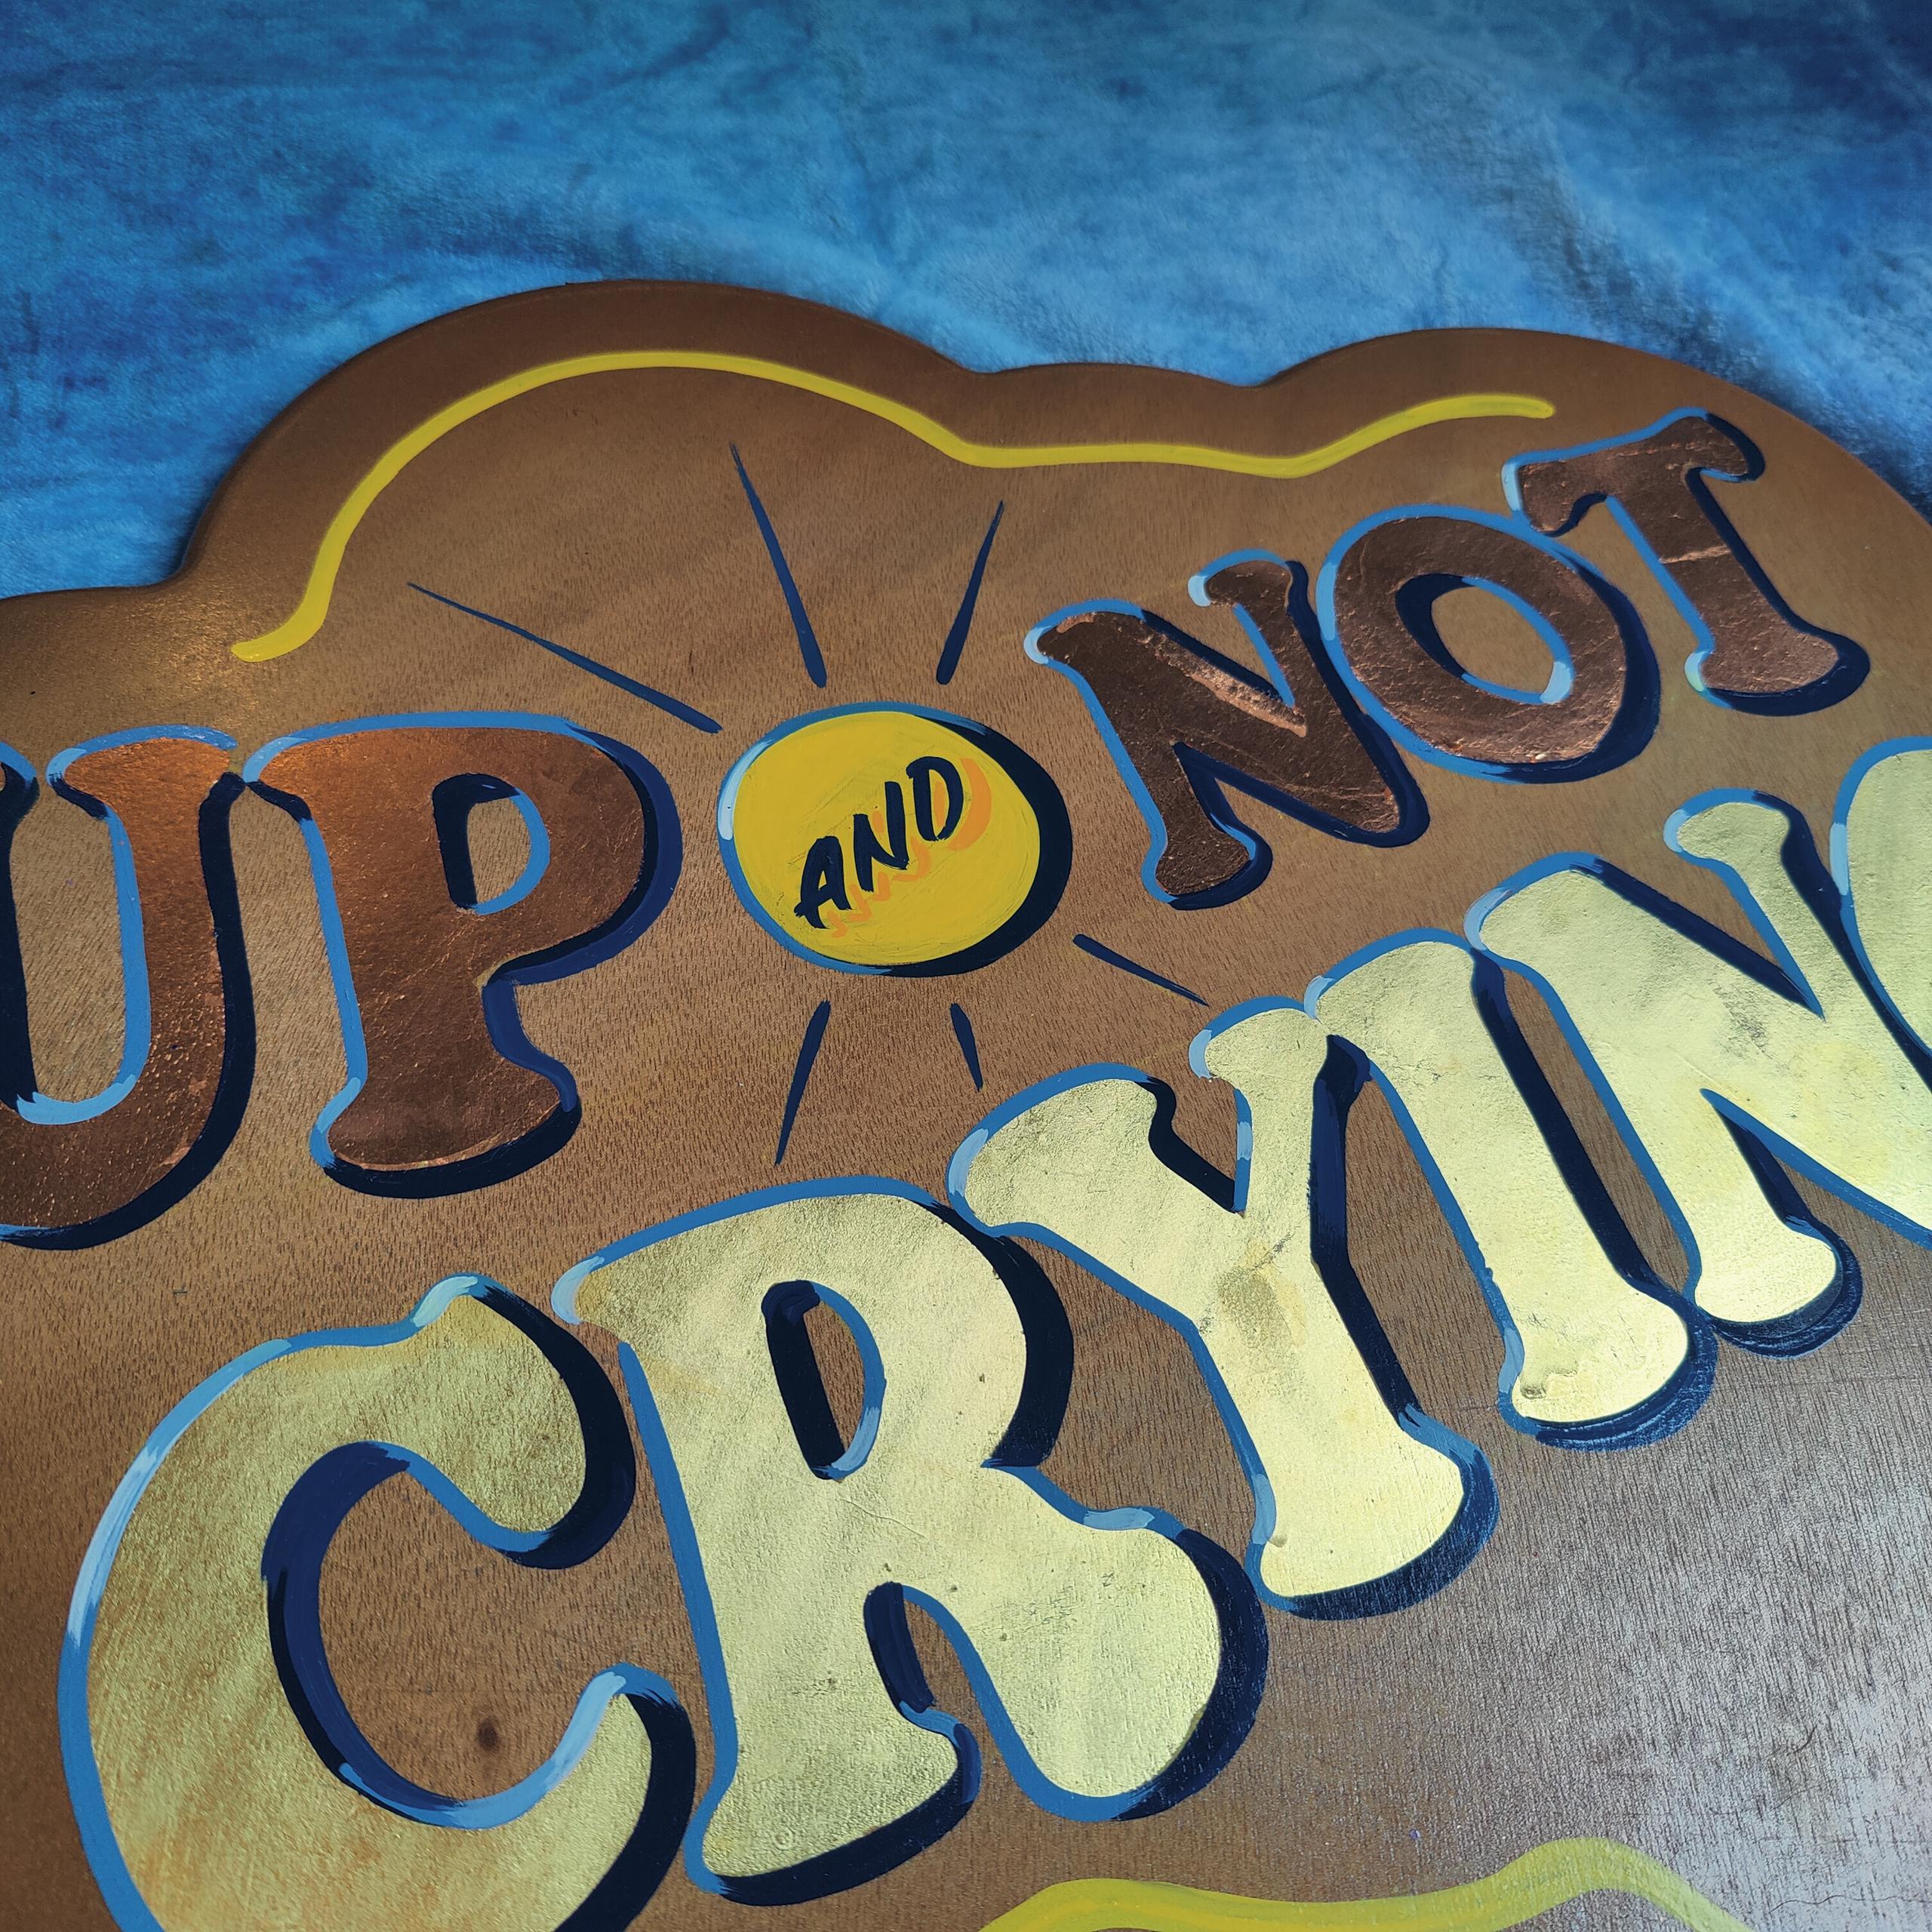 'UP & NOT CRYING' bevelled wooden panel with gold and copper leaf